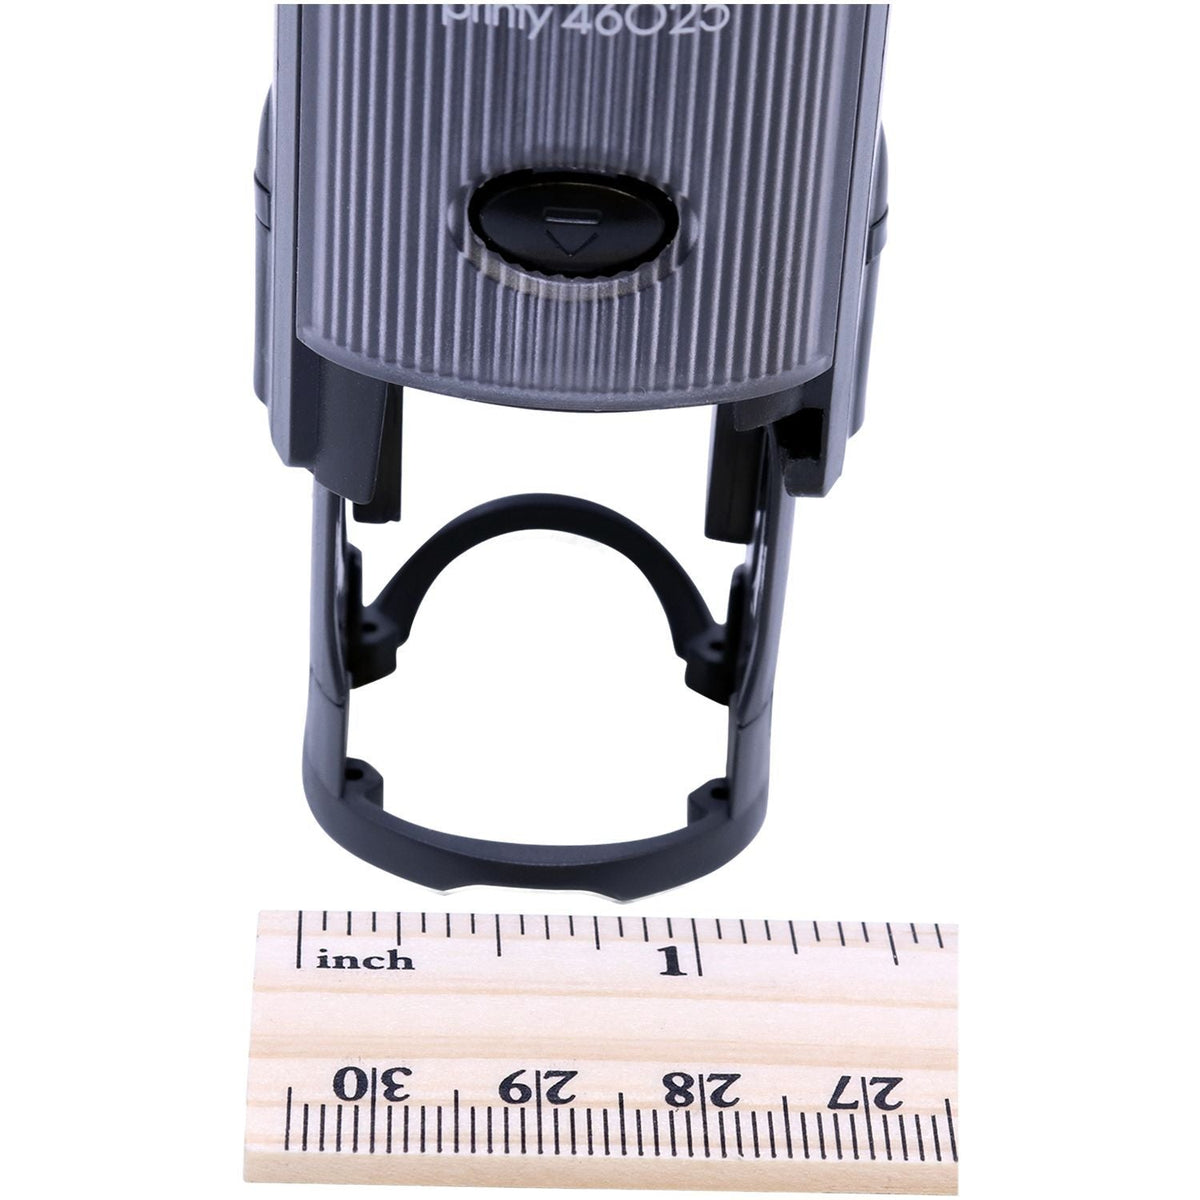 Measurment of Self-Inking Round Initial Stamp with Ruler